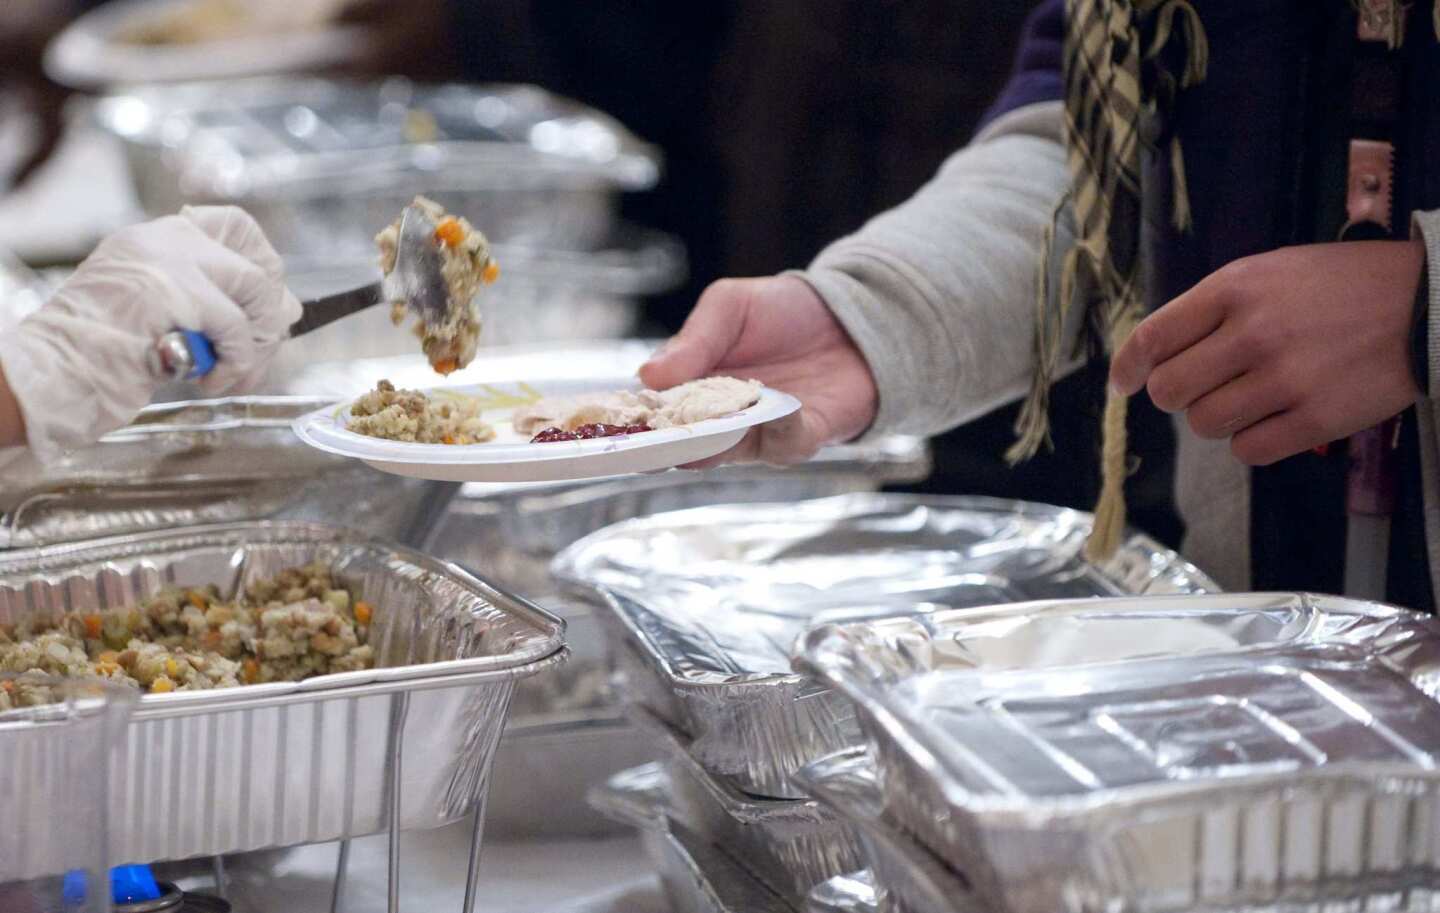 Occupy D.C. demonstrators receive a Thanksgiving meal from volunteers at the New York Avenue Presbyterian Church in Washington.